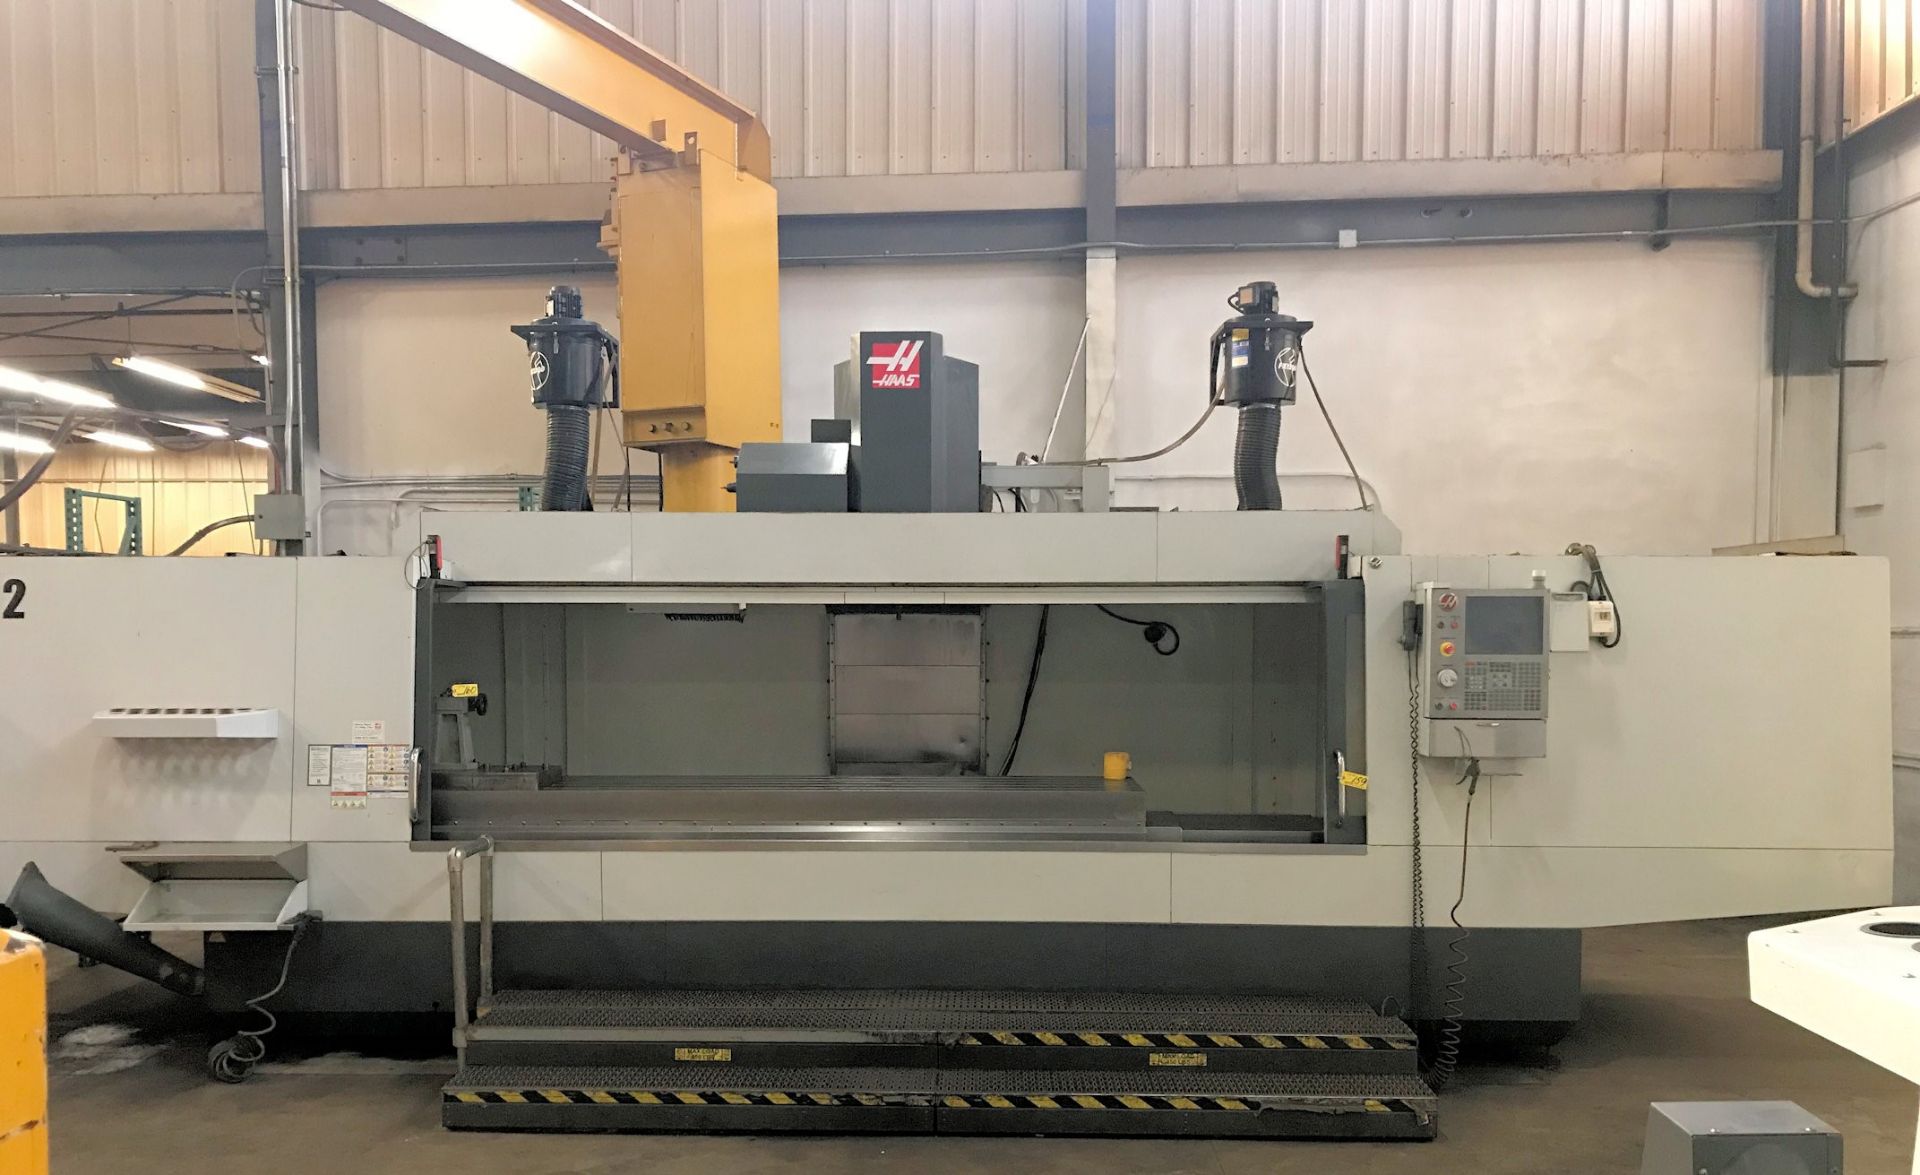 HAAS VF12/40 4-AXIS CNC VERTICAL MACHINING CENTER, X-150", Y-32", Z-30", 150" X 28" TABLE, CAT 40